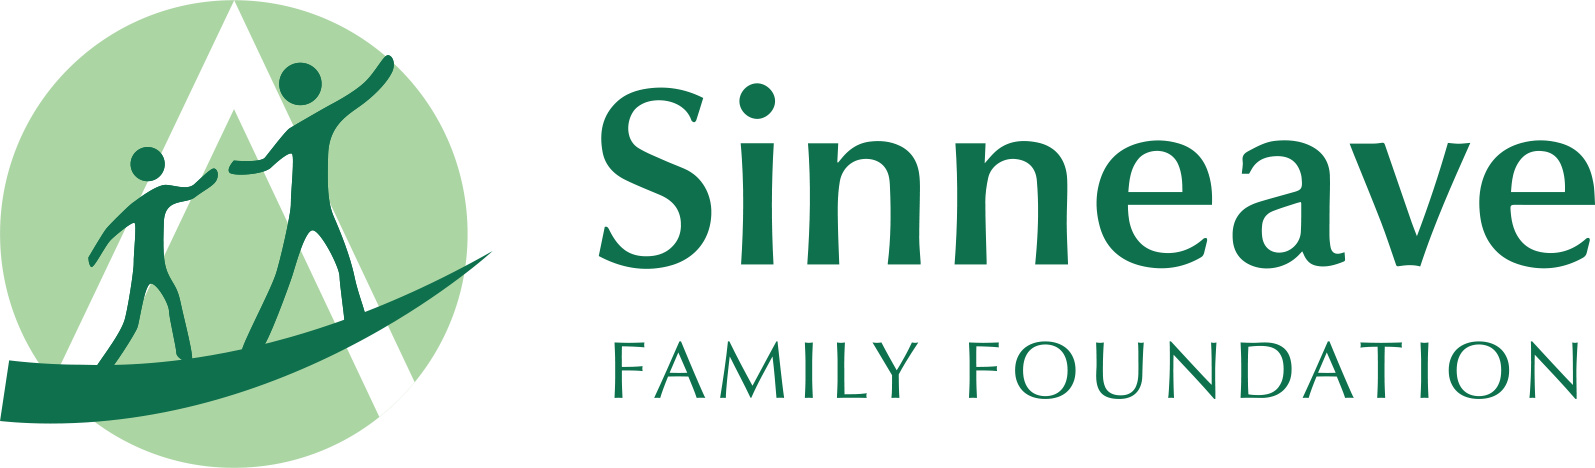 sinneave_family_foundation_logo.png